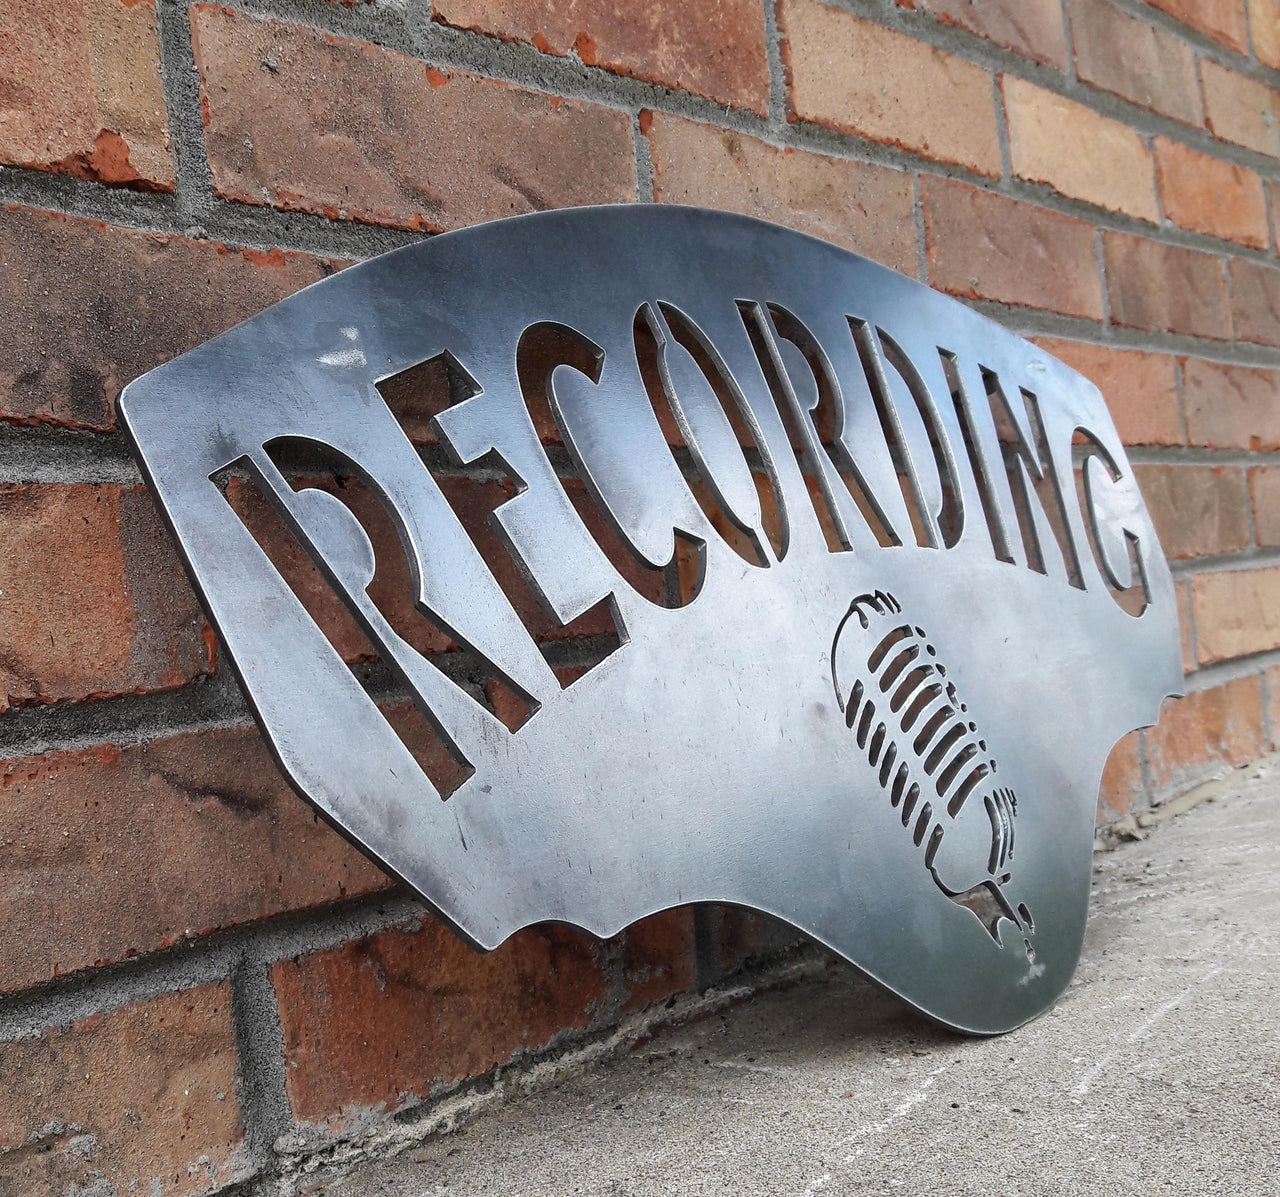 This metal sign has hidden mounts welded to the back which stands the sign 1" off the wall.  There is an image of a microphone on the sign and a line of text. The sign reads, "RECORDING".